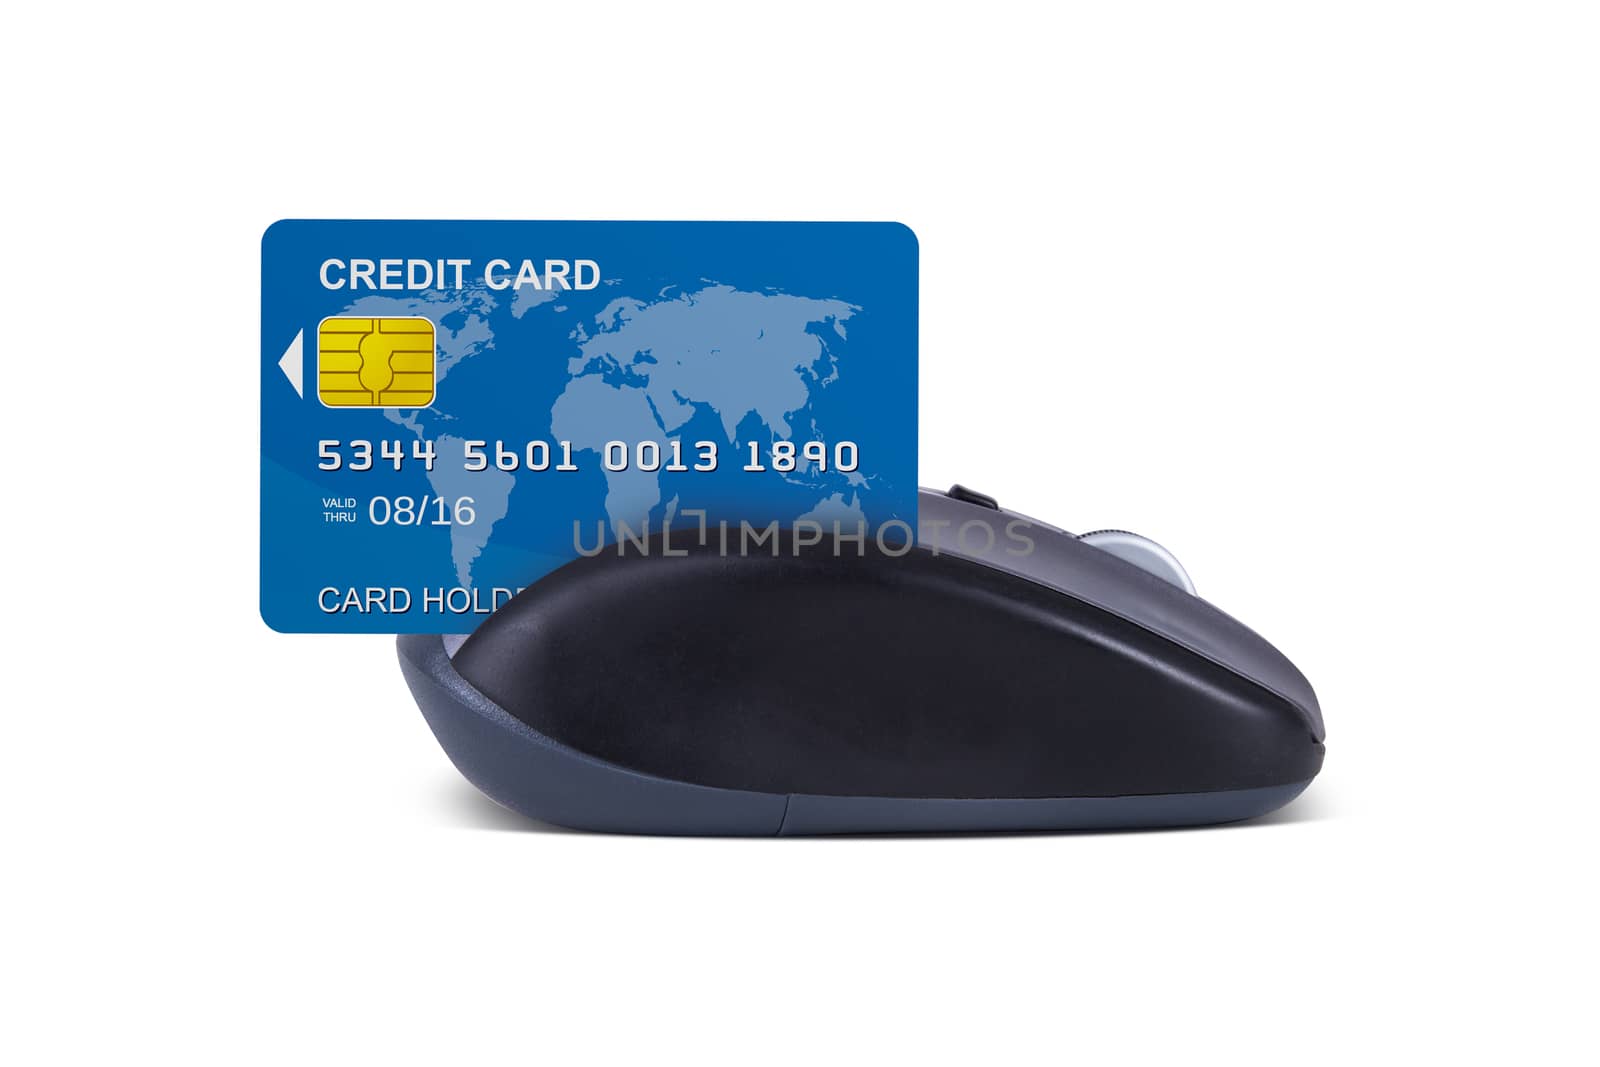 Online shopping concept, computer mouse with credit card, isolated on white background.